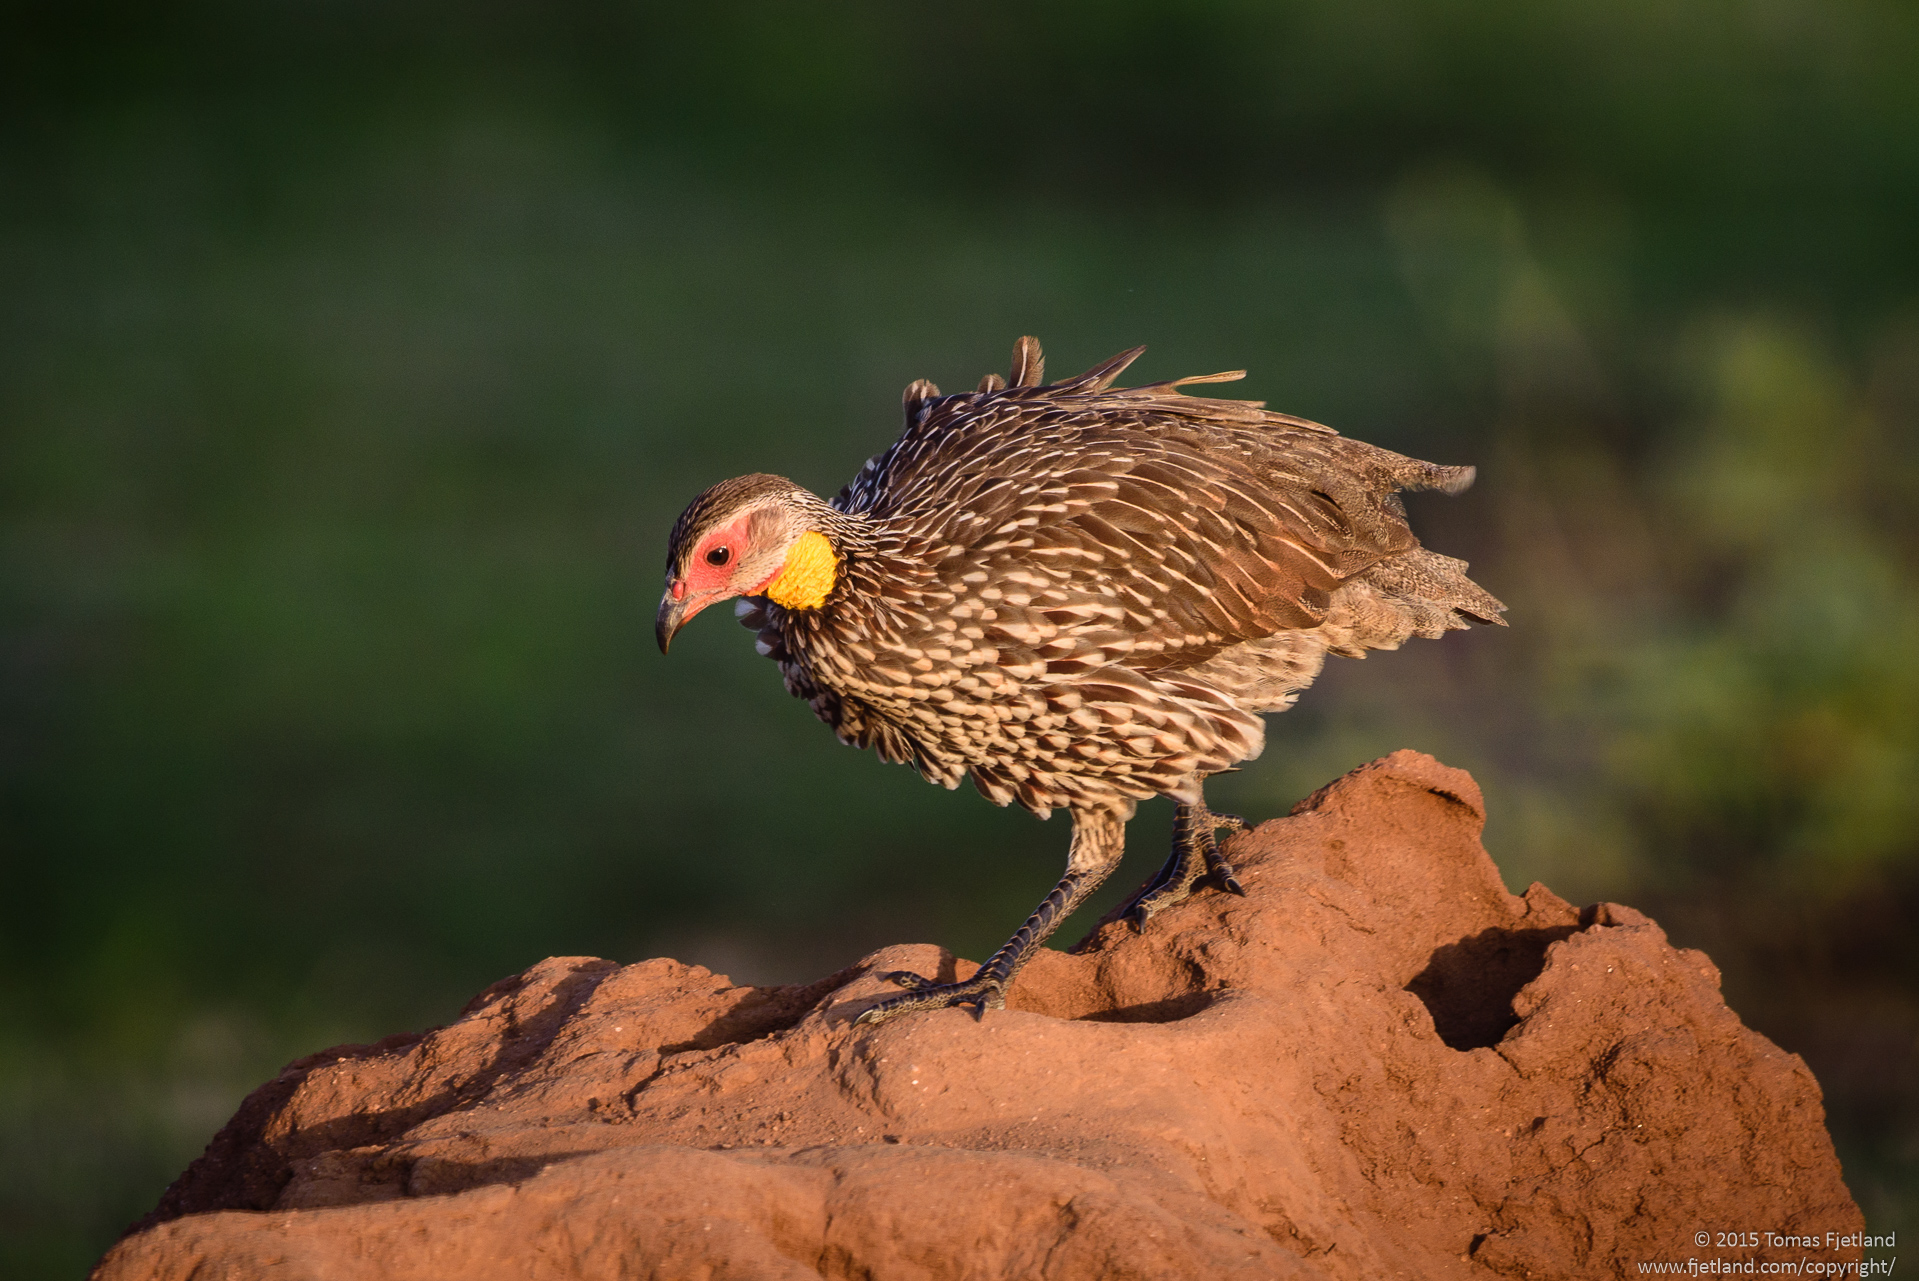 The yellow necked spurfowl will find the highest point it can easily get to, like this termite mound or a tree branch, and then sound its characteristic and very loud calls.